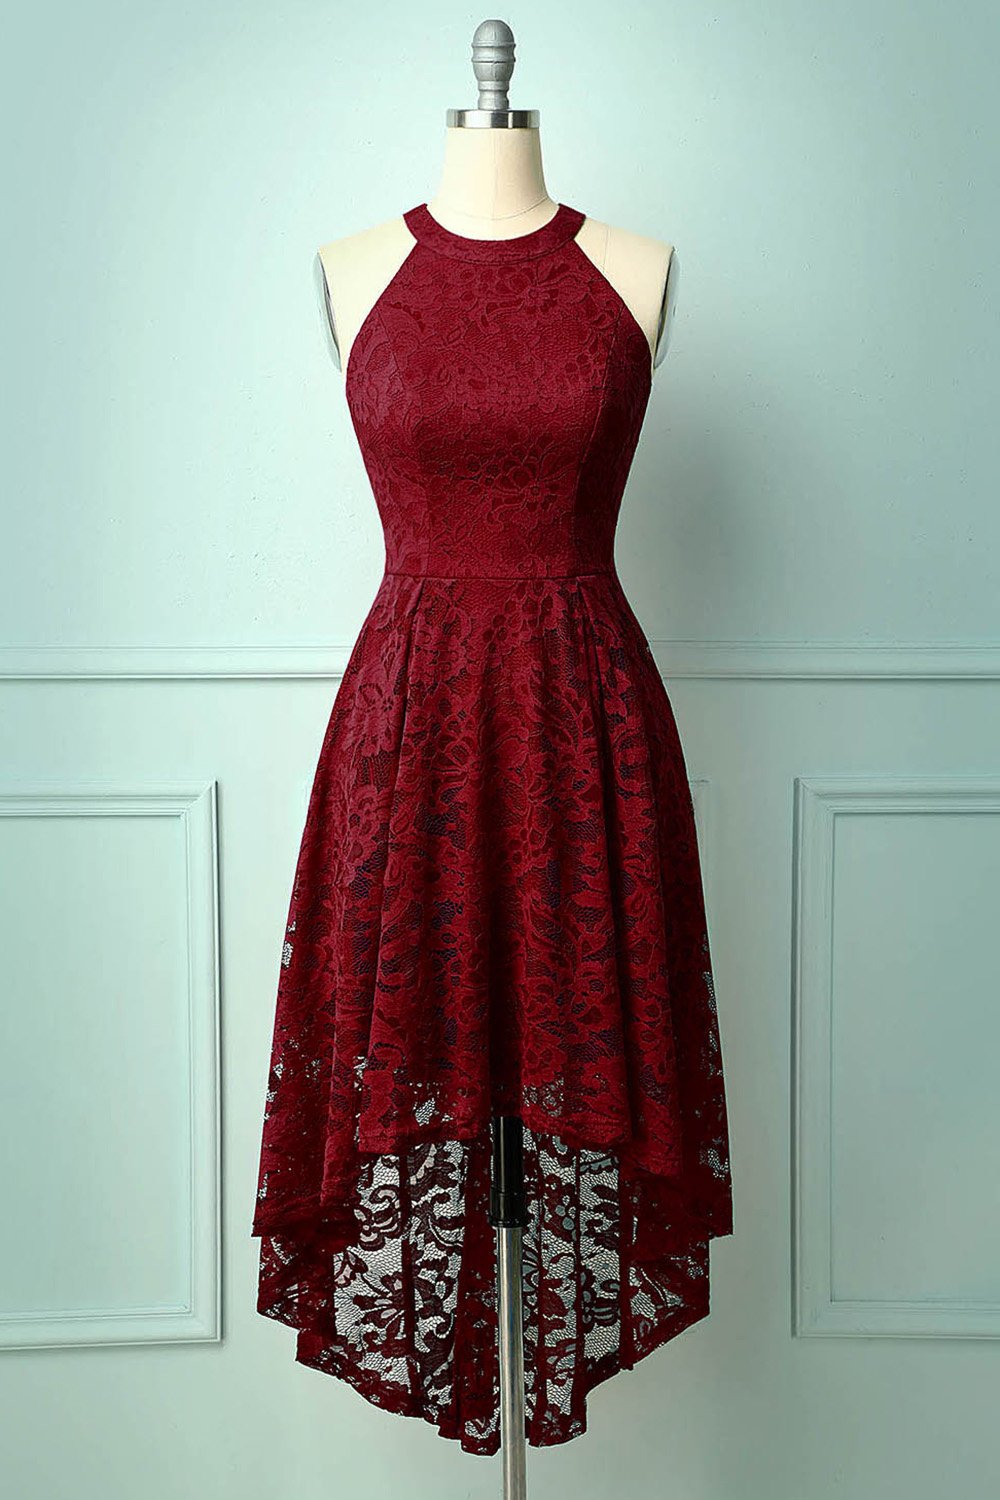 Burgundy Red Lace Dress